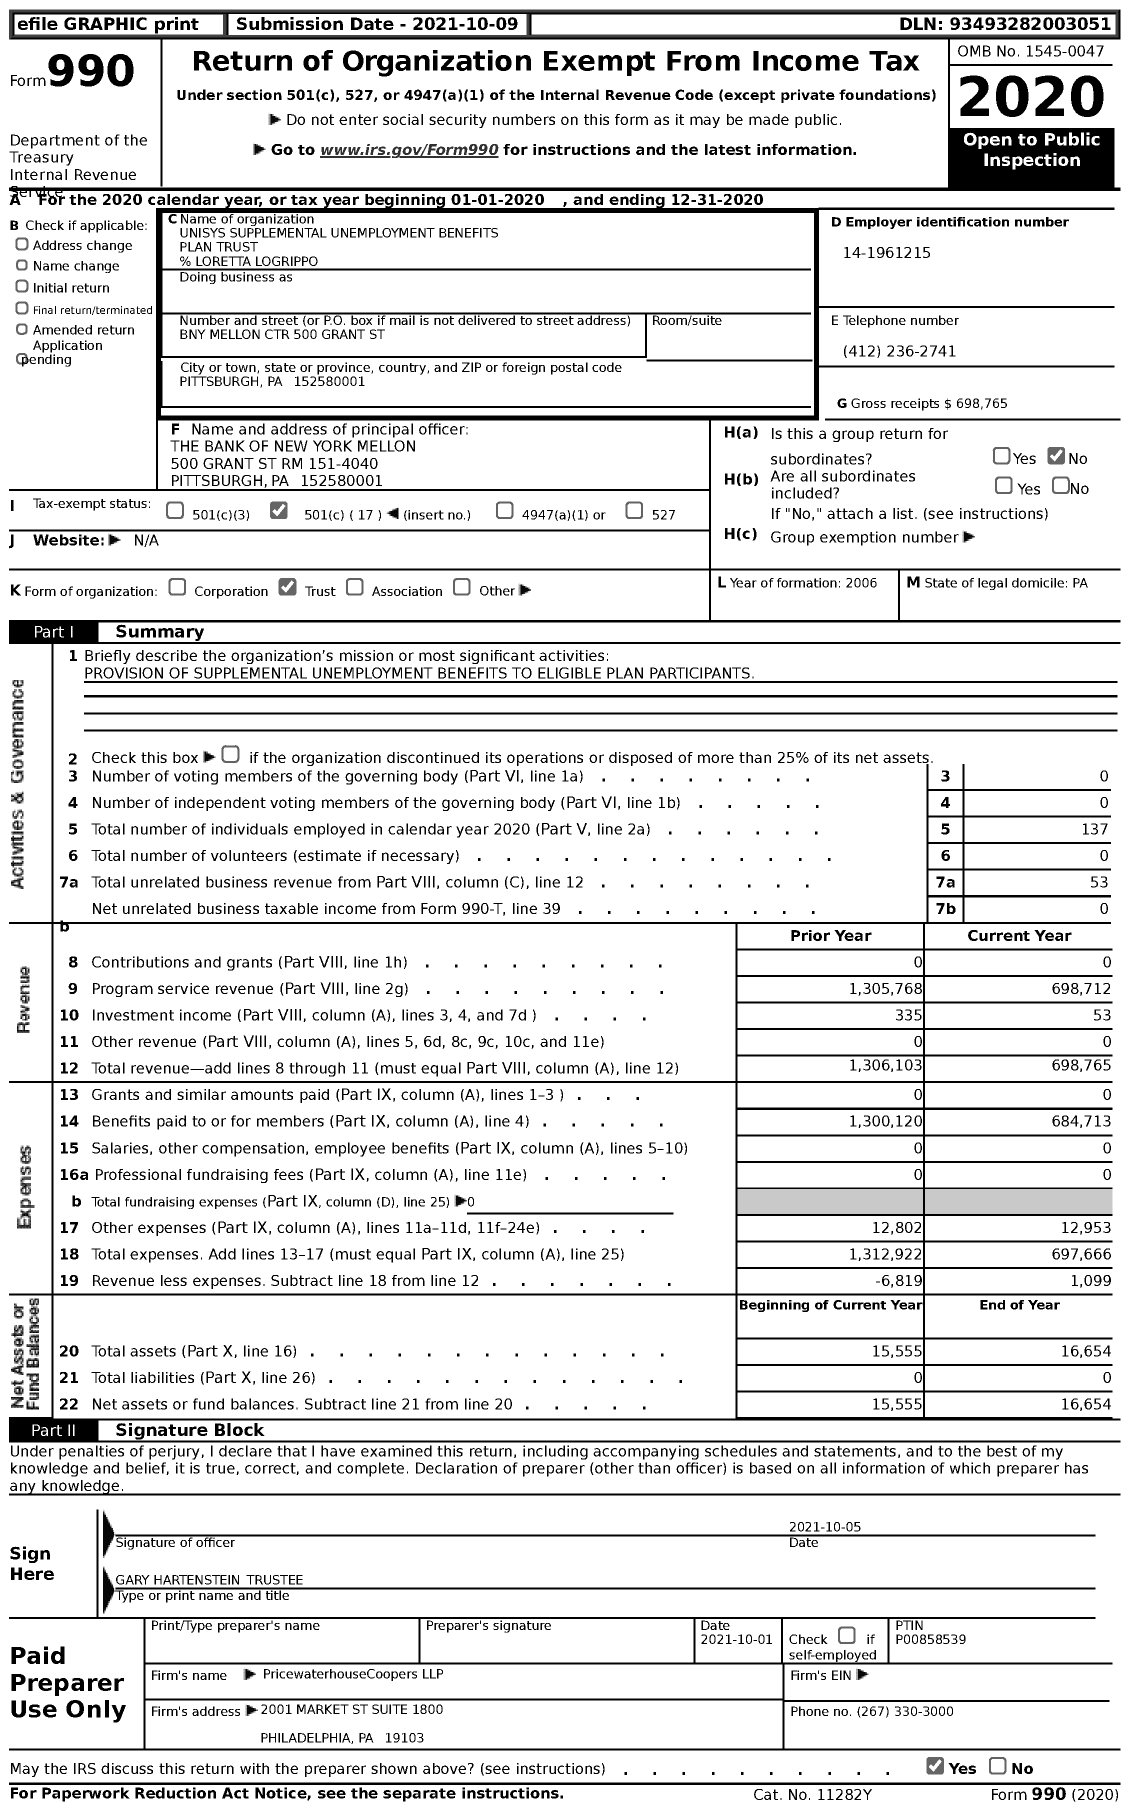 Image of first page of 2020 Form 990 for Unisys Supplemental Unemployment Benefits Plan Trust